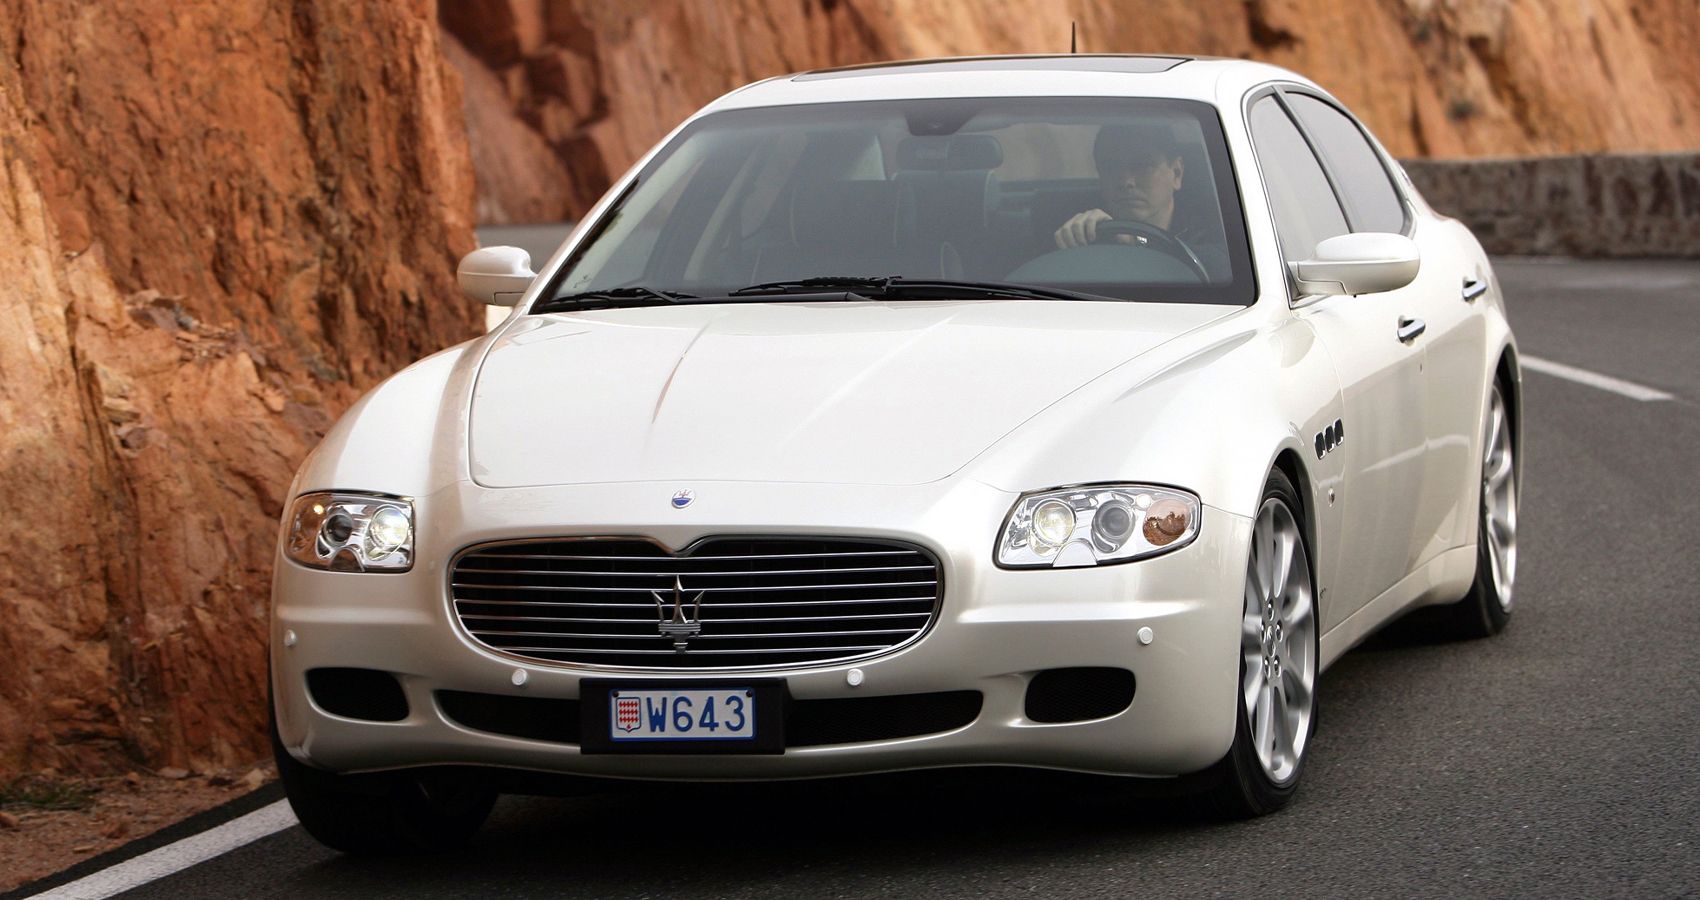 The front of a white Quattroporte on the move